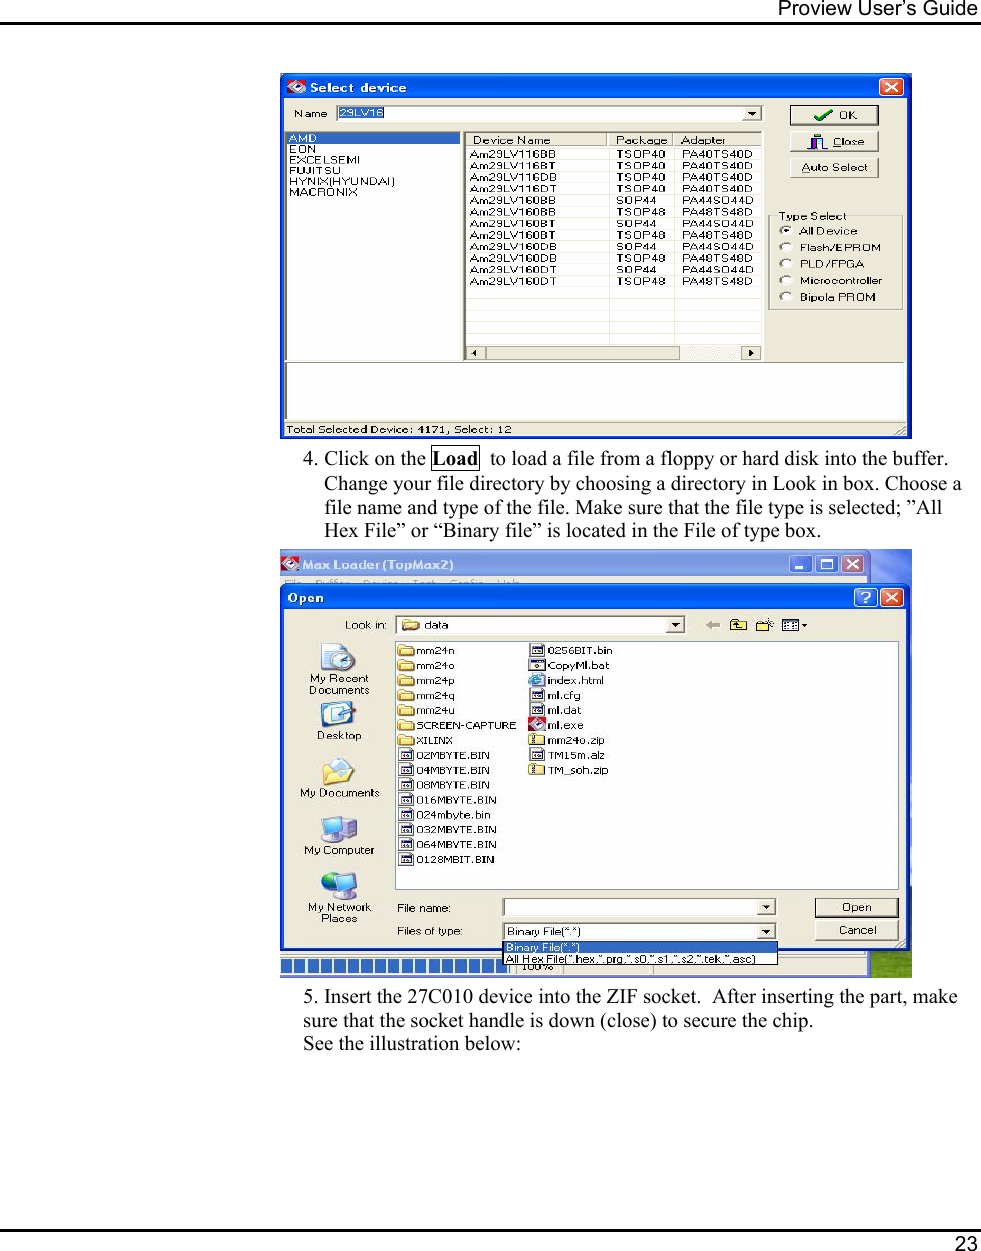 Proview User’s Guide  23     4. Click on the Load  to load a file from a floppy or hard disk into the buffer.  Change your file directory by choosing a directory in Look in box. Choose a file name and type of the file. Make sure that the file type is selected; ”All Hex File” or “Binary file” is located in the File of type box.    5. Insert the 27C010 device into the ZIF socket.  After inserting the part, make sure that the socket handle is down (close) to secure the chip. See the illustration below:      